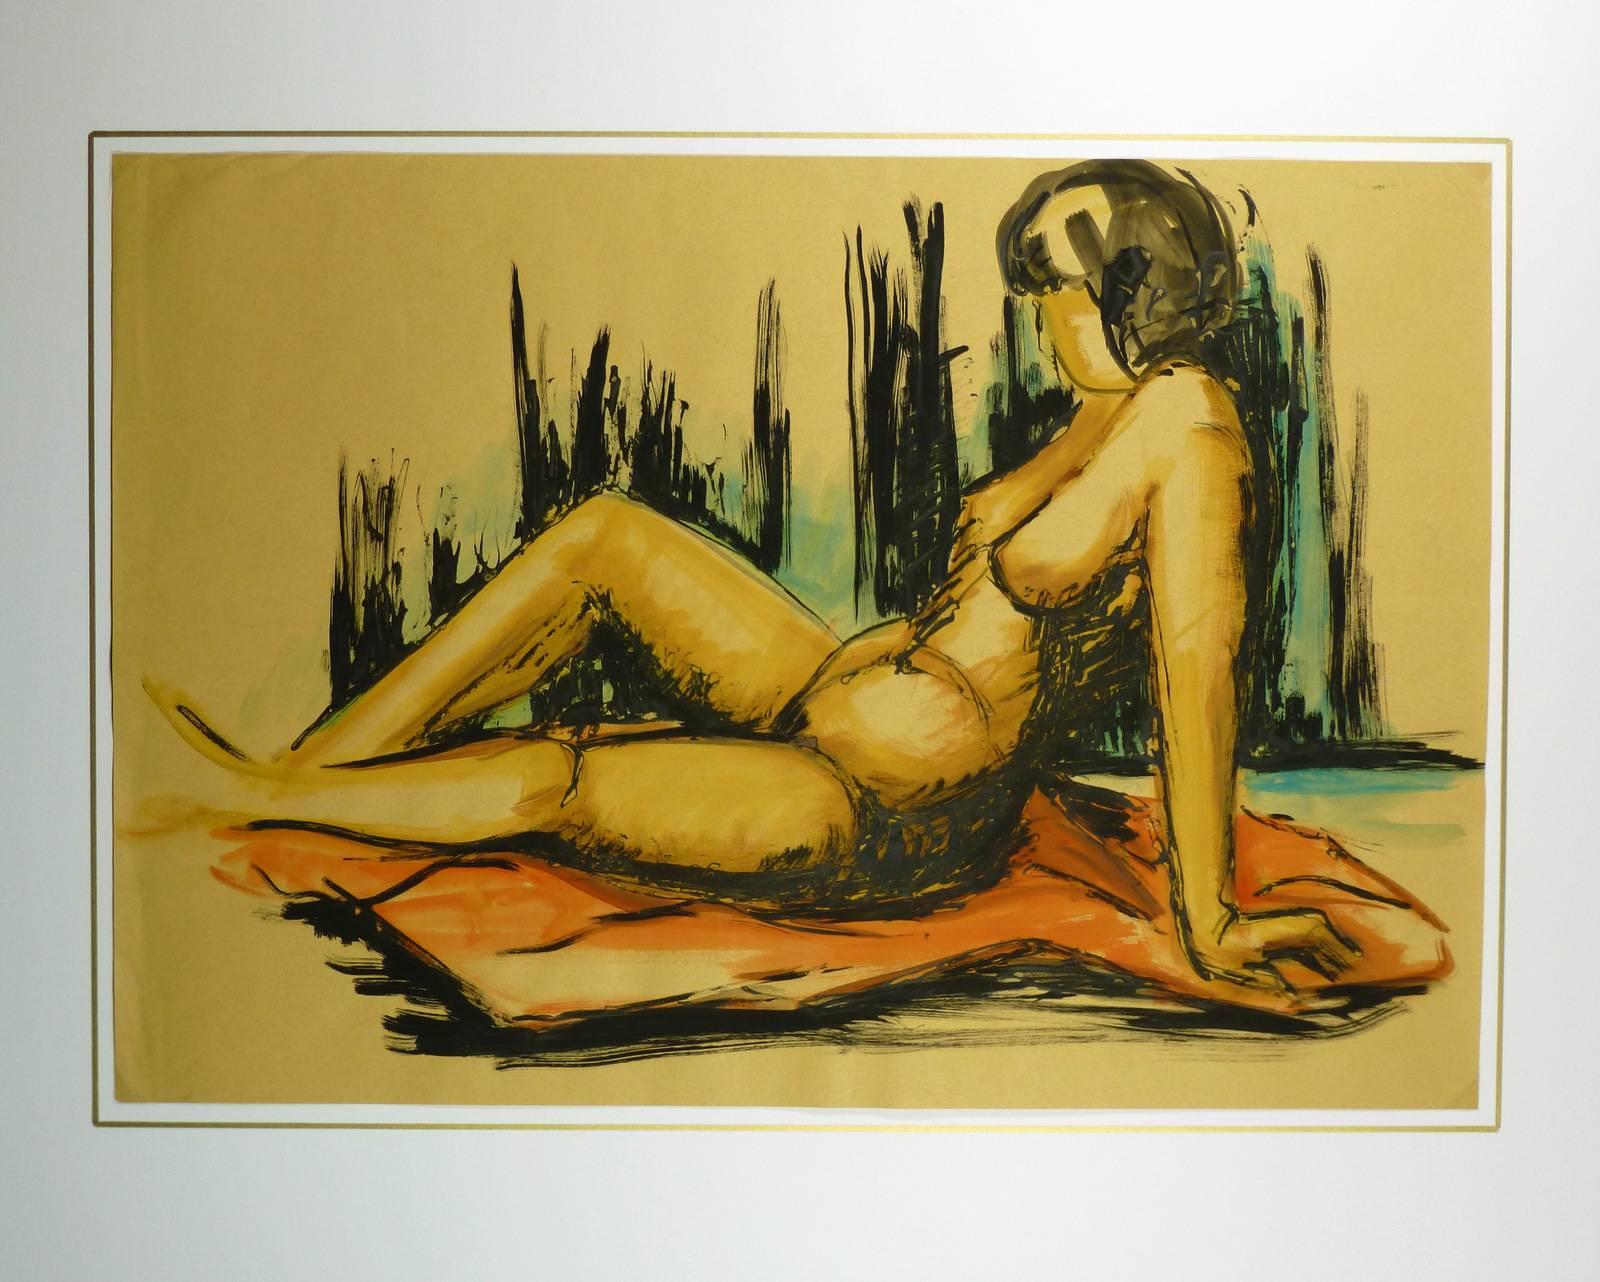 Reclined Female Nude - Painting by Esther Meyer